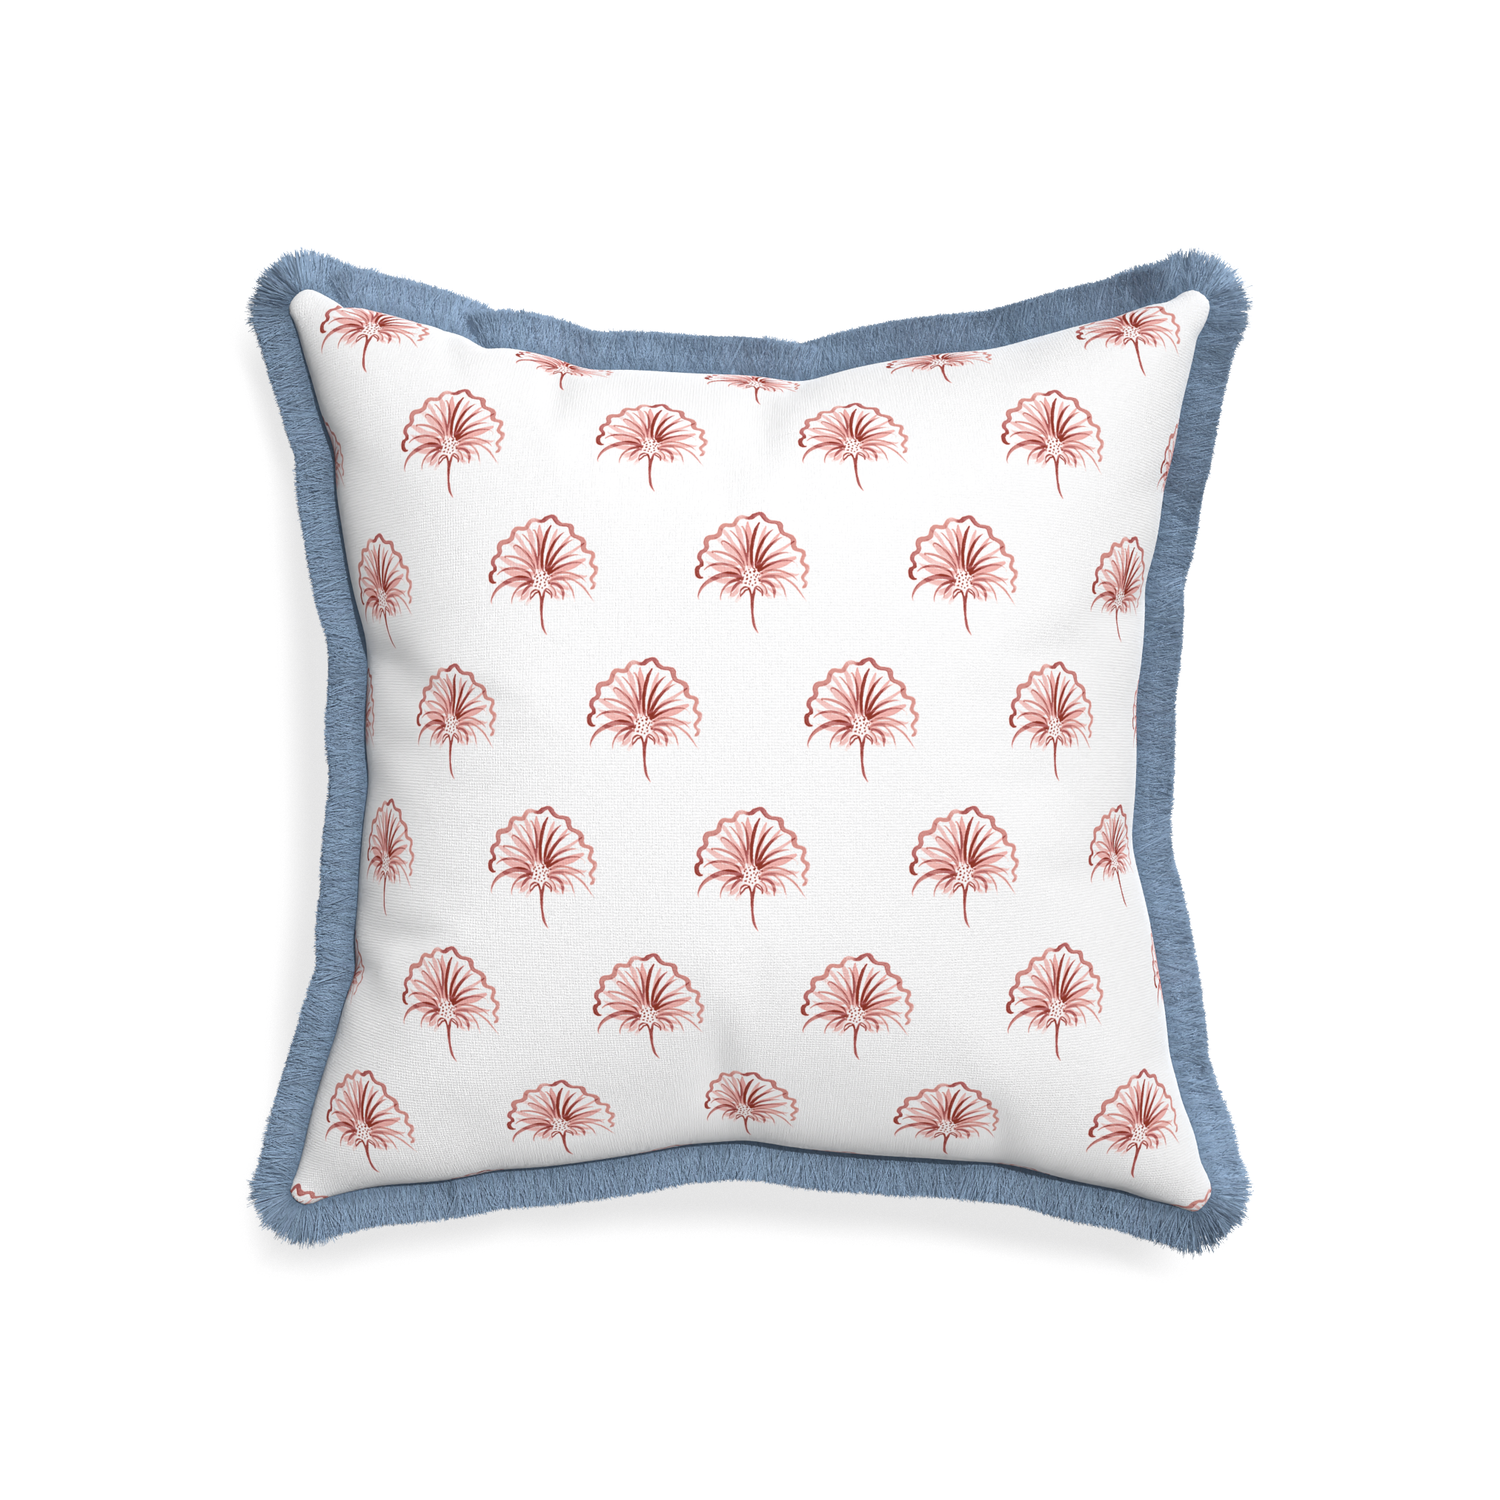 20-square penelope rose custom floral pinkpillow with sky fringe on white background